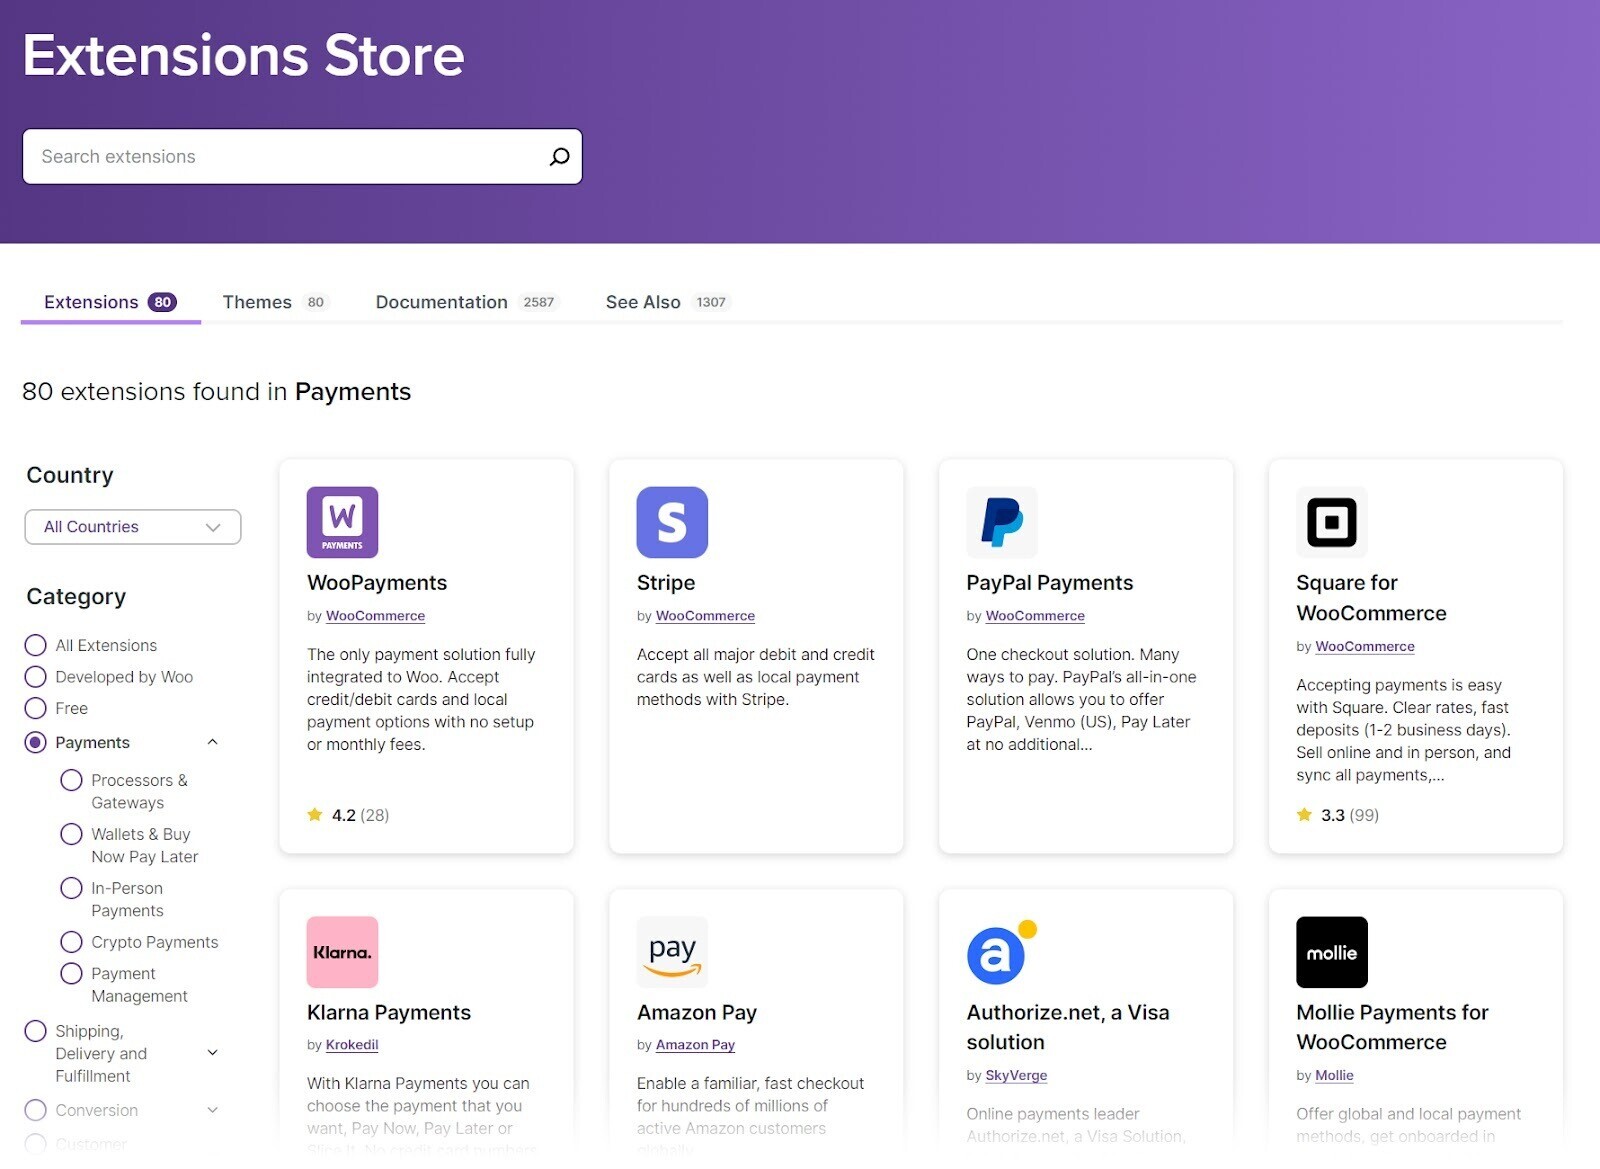 WooCommerce's "Extensions Store" page